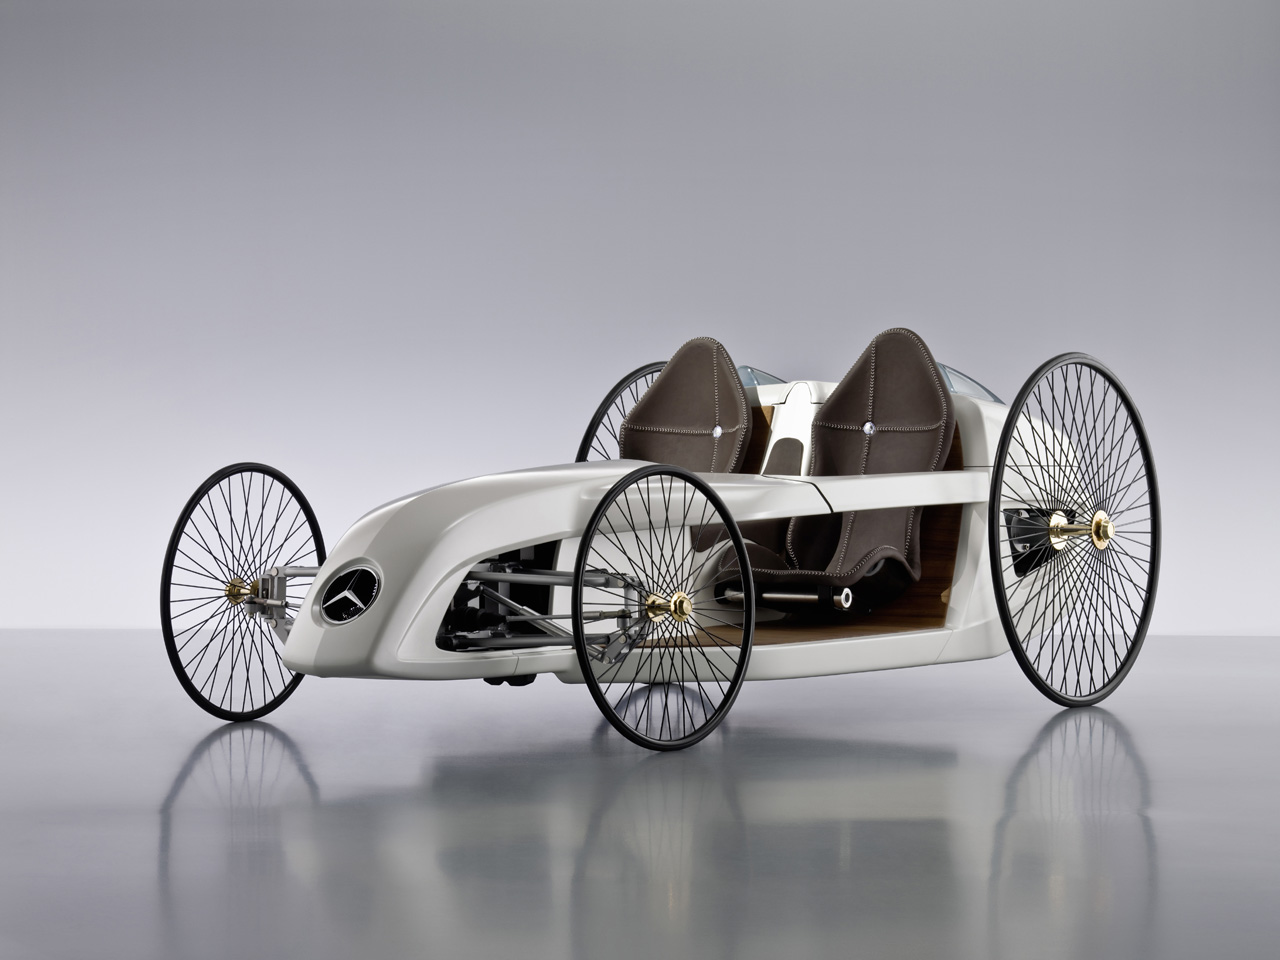 Mercedes-Benz F-Cell Roadster